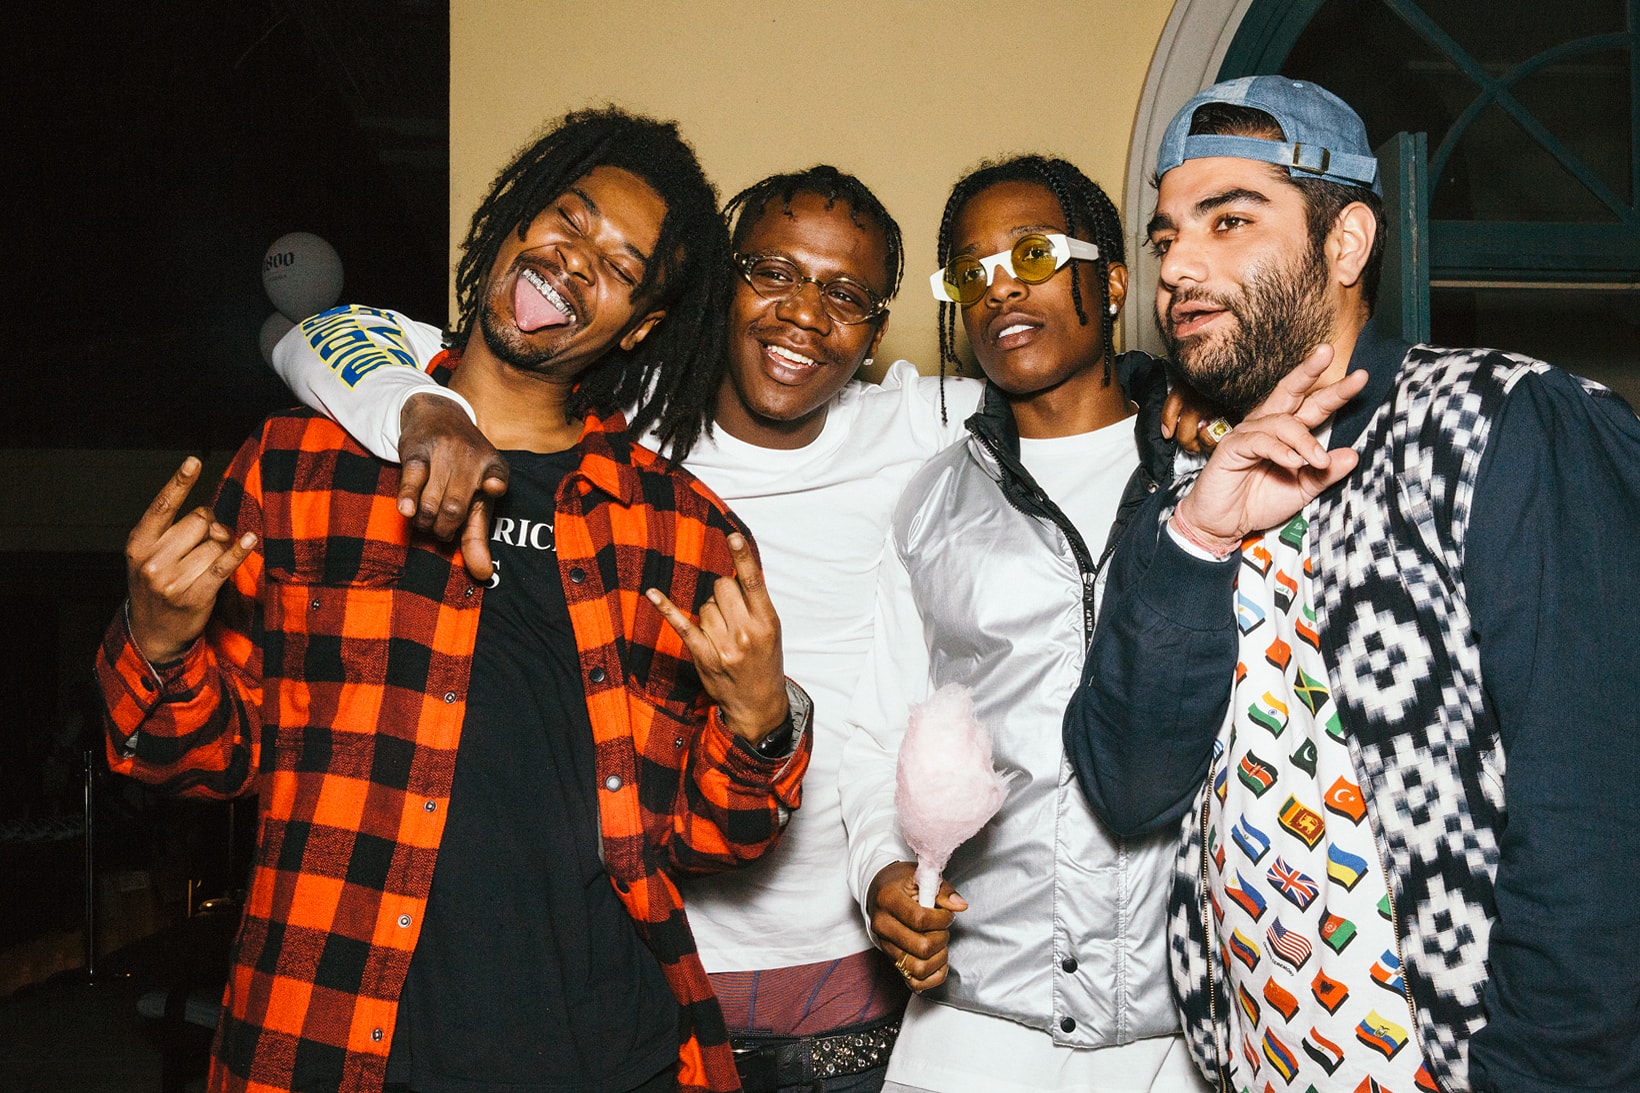 HYPEBEAST A$AP Mob Cozy Party sxsw lil yachty danny brown